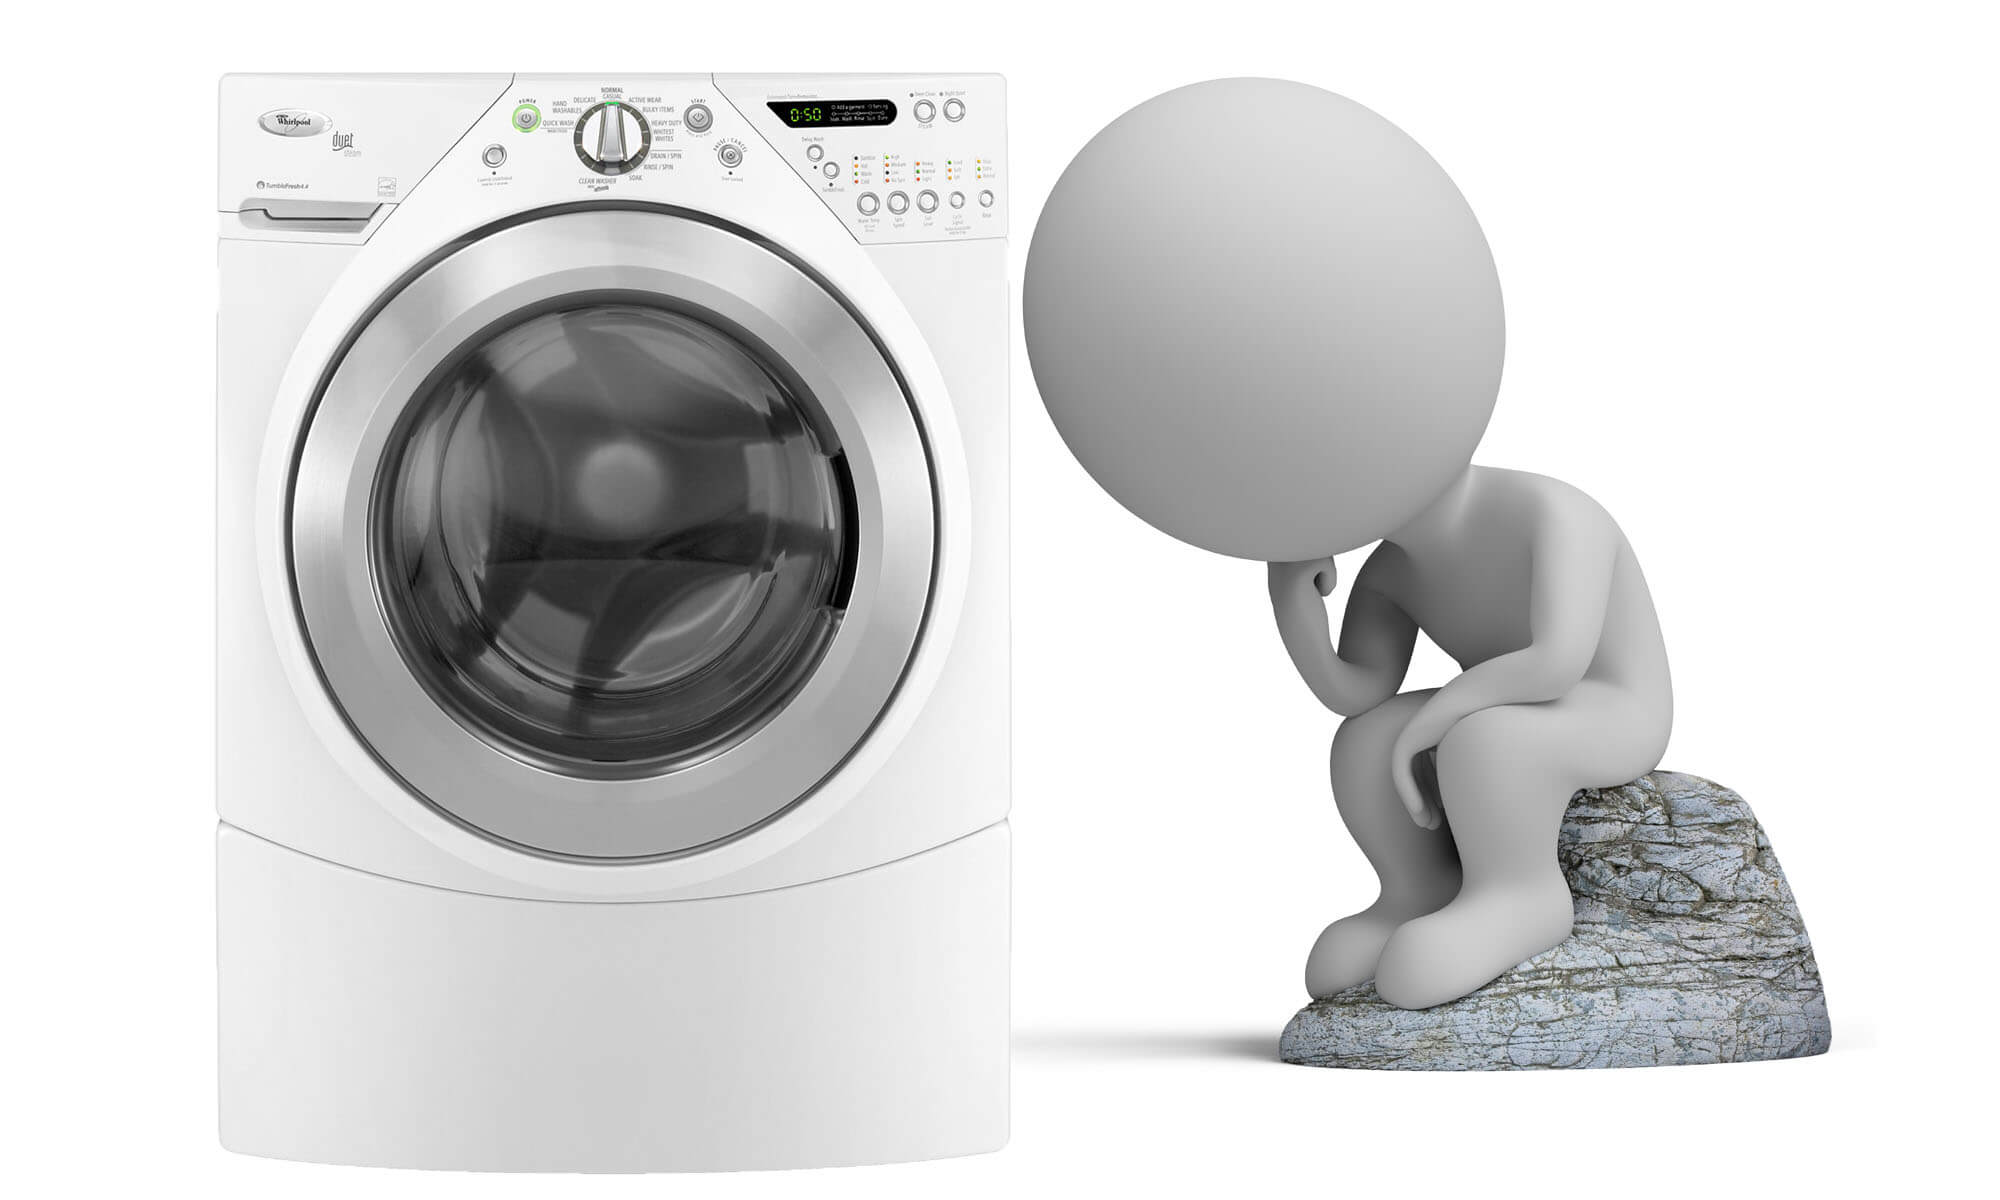 How To Fix The Error Code F27 For Whirlpool Washer